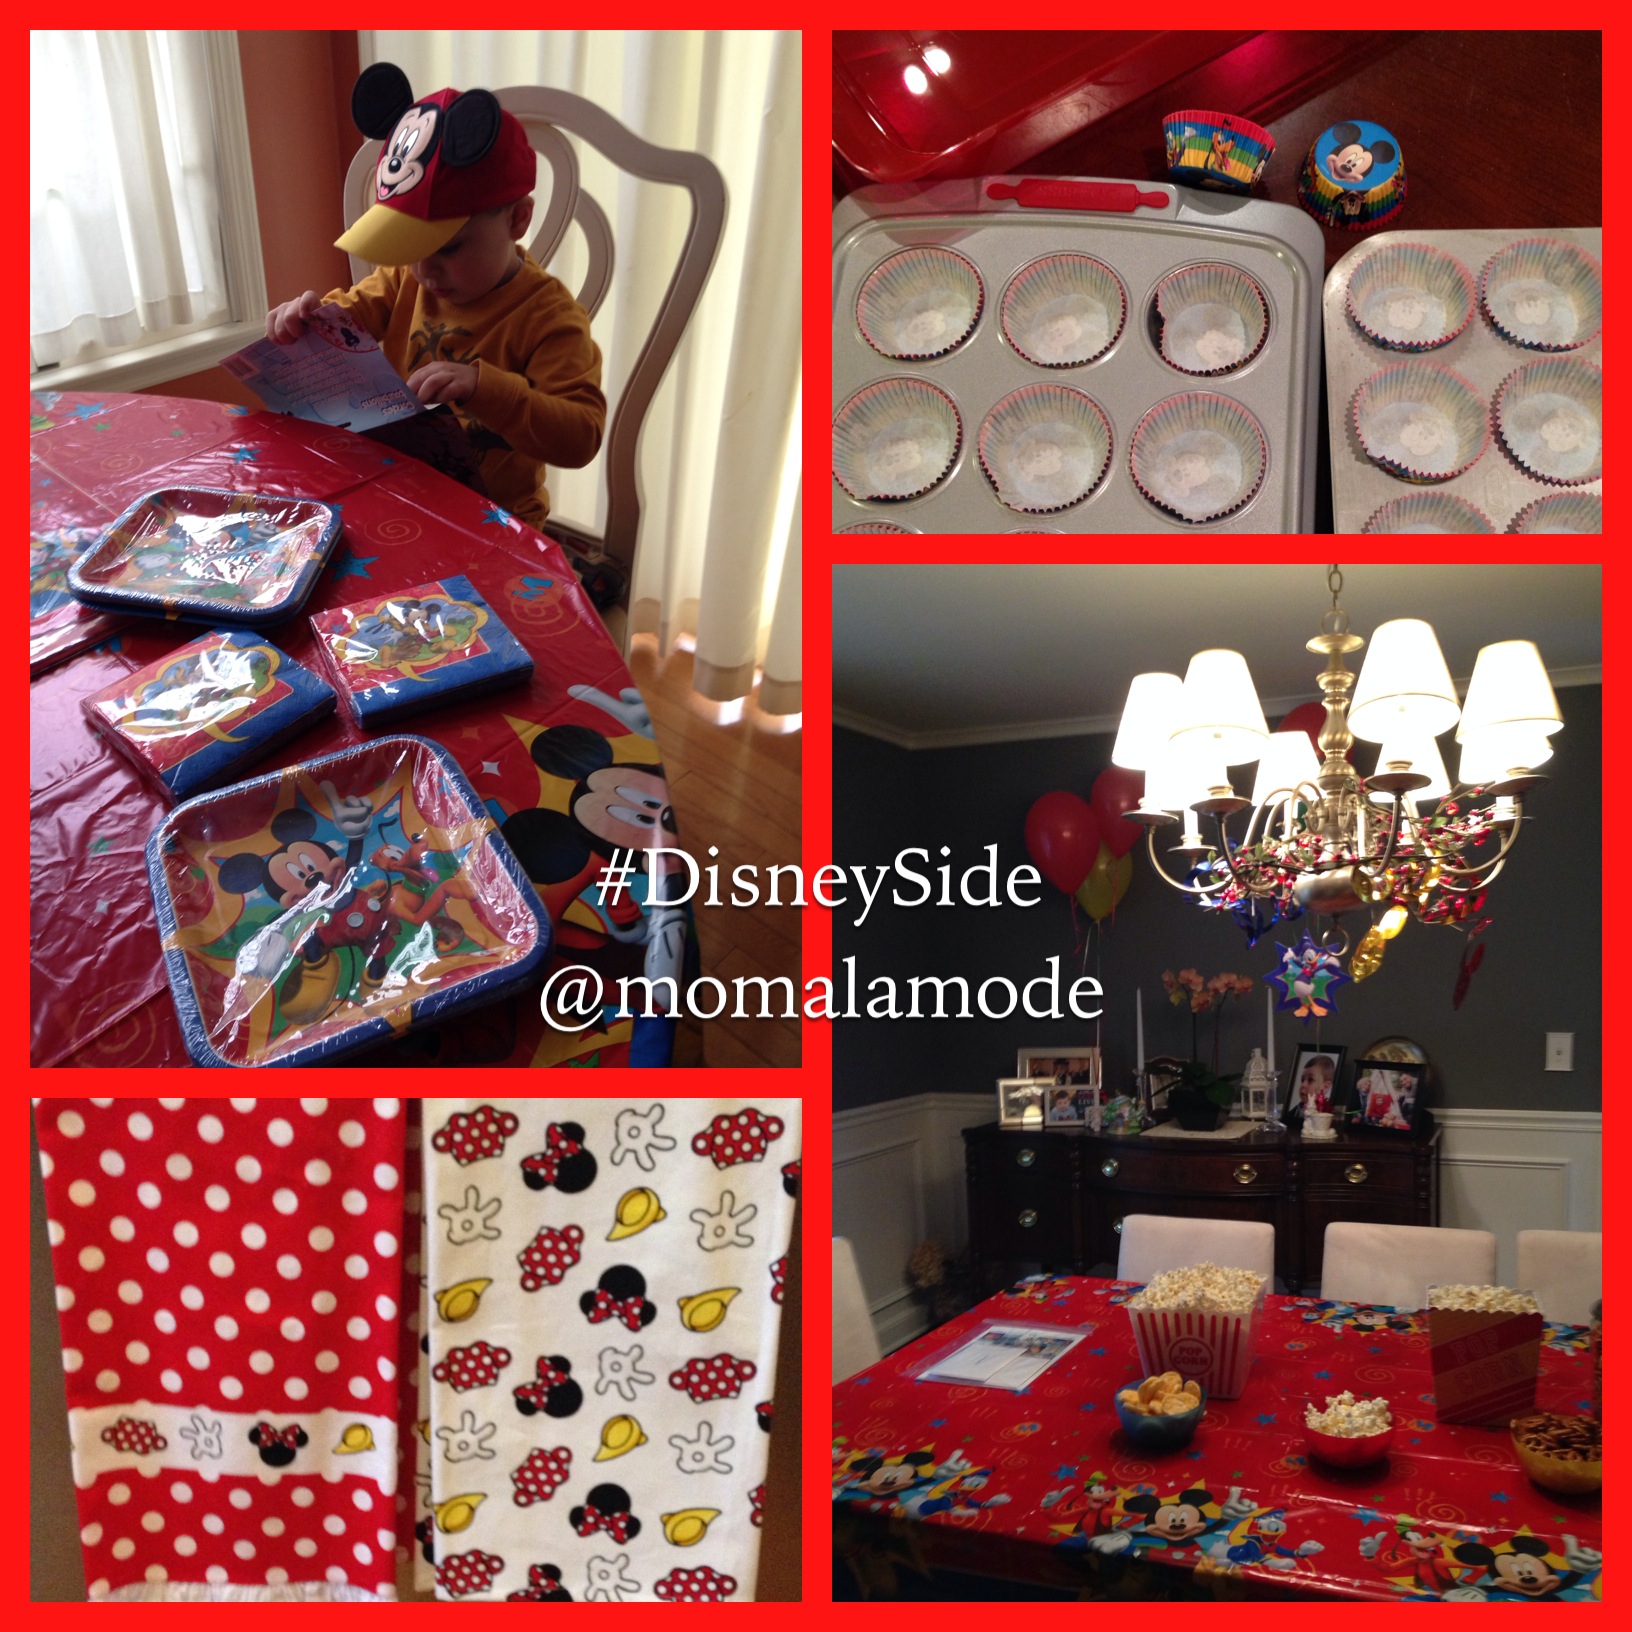 Decorations and prepping for our #DisneySide party